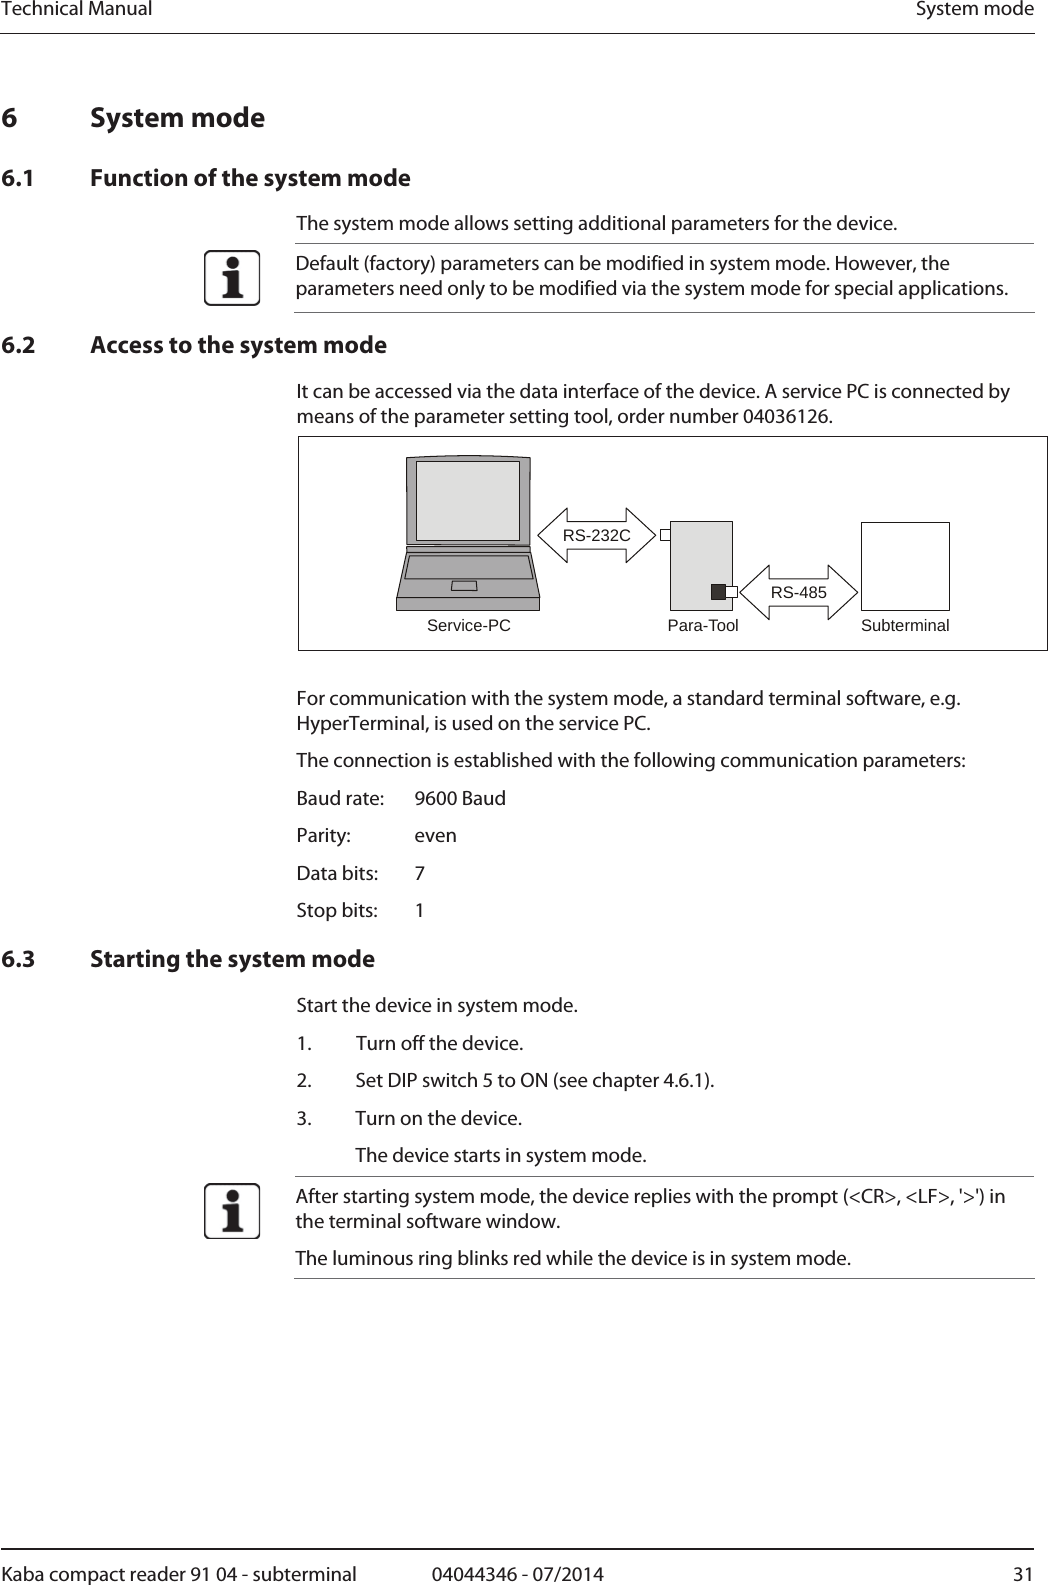 Technical Manual  System modeKaba compact reader 91 04 - subterminal  04044346 - 07/2014  316 System mode 6.1 Function of the system mode The system mode allows setting additional parameters for the device.  Default (factory) parameters can be modified in system mode. However, the parameters need only to be modified via the system mode for special applications. 6.2 Access to the system mode It can be accessed via the data interface of the device. A service PC is connected by means of the parameter setting tool, order number 04036126. SubterminalPara-ToolService-PCRS-232CRS-485  For communication with the system mode, a standard terminal software, e.g. HyperTerminal, is used on the service PC. The connection is established with the following communication parameters: Baud rate:   9600 Baud Parity:   even Data bits:   7 Stop bits:   1 6.3 Starting the system mode Start the device in system mode. 1. Turn off the device. 2.Set DIP switch 5 to ON (see chapter 4.6.1). 3.Turn on the device.   The device starts in system mode.  After starting system mode, the device replies with the prompt (&lt;CR&gt;, &lt;LF&gt;, &apos;&gt;&apos;) in the terminal software window. The luminous ring blinks red while the device is in system mode.  